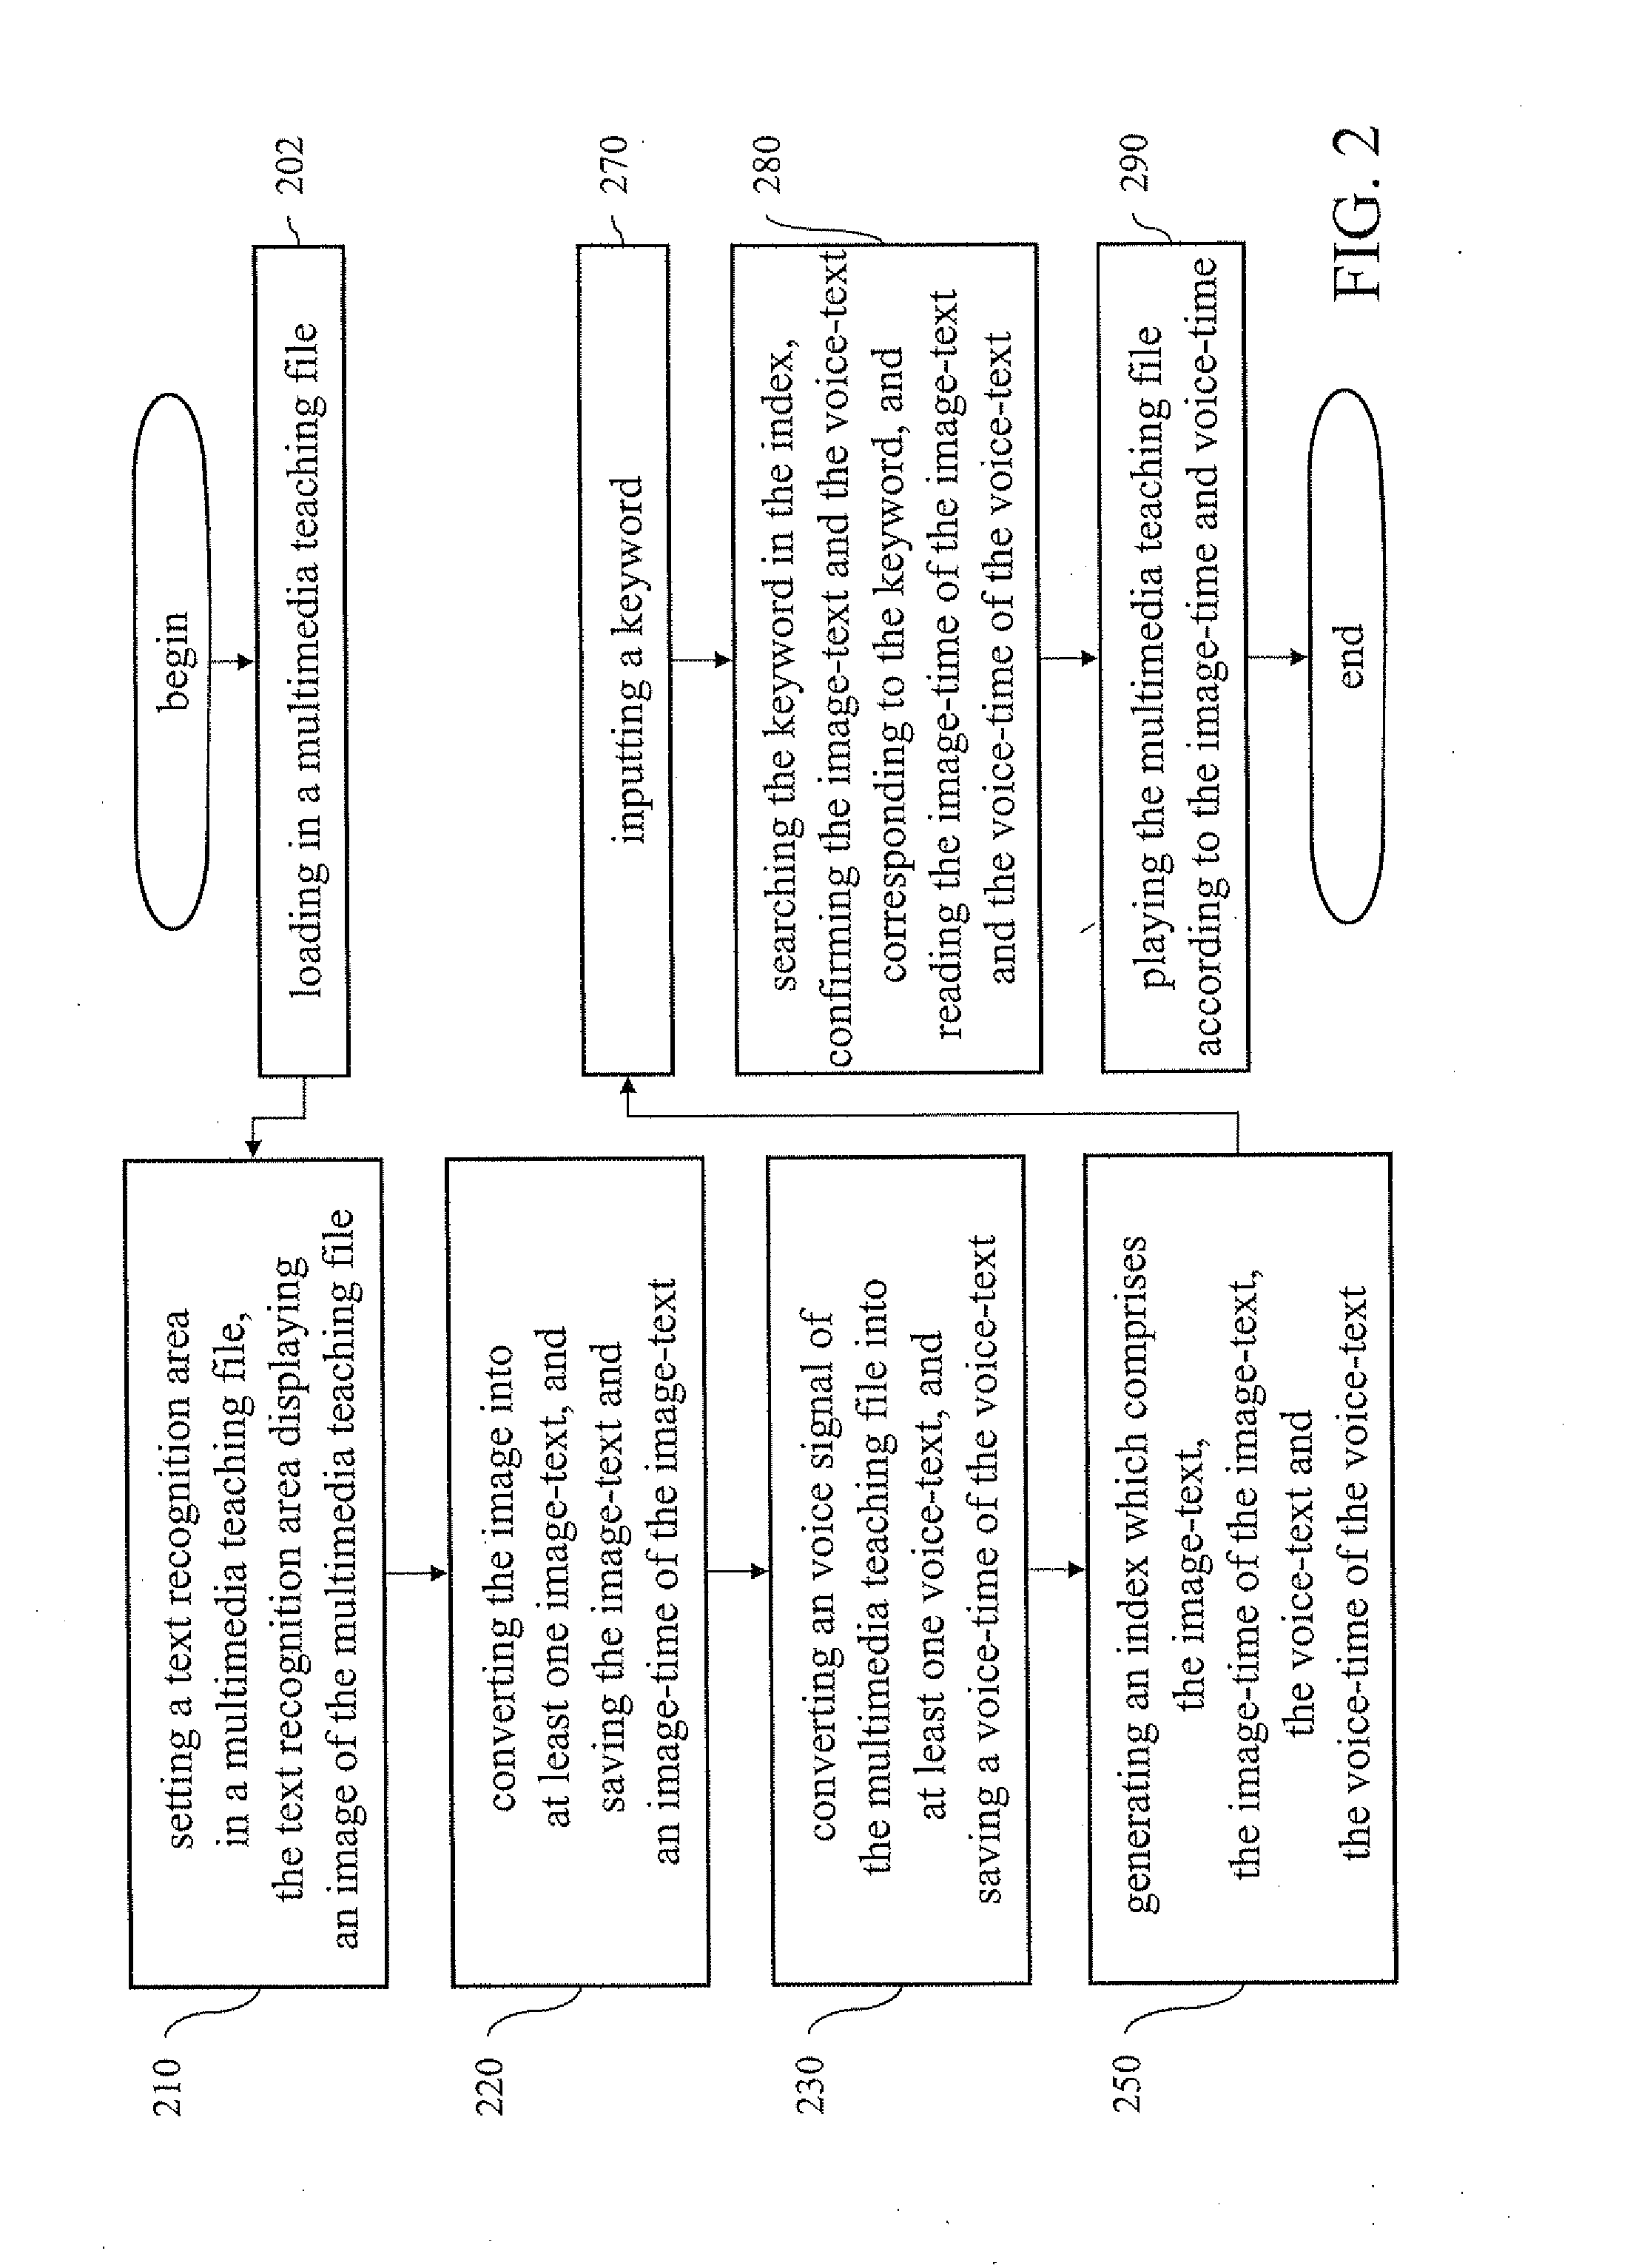 System and method for browsing multimedia file